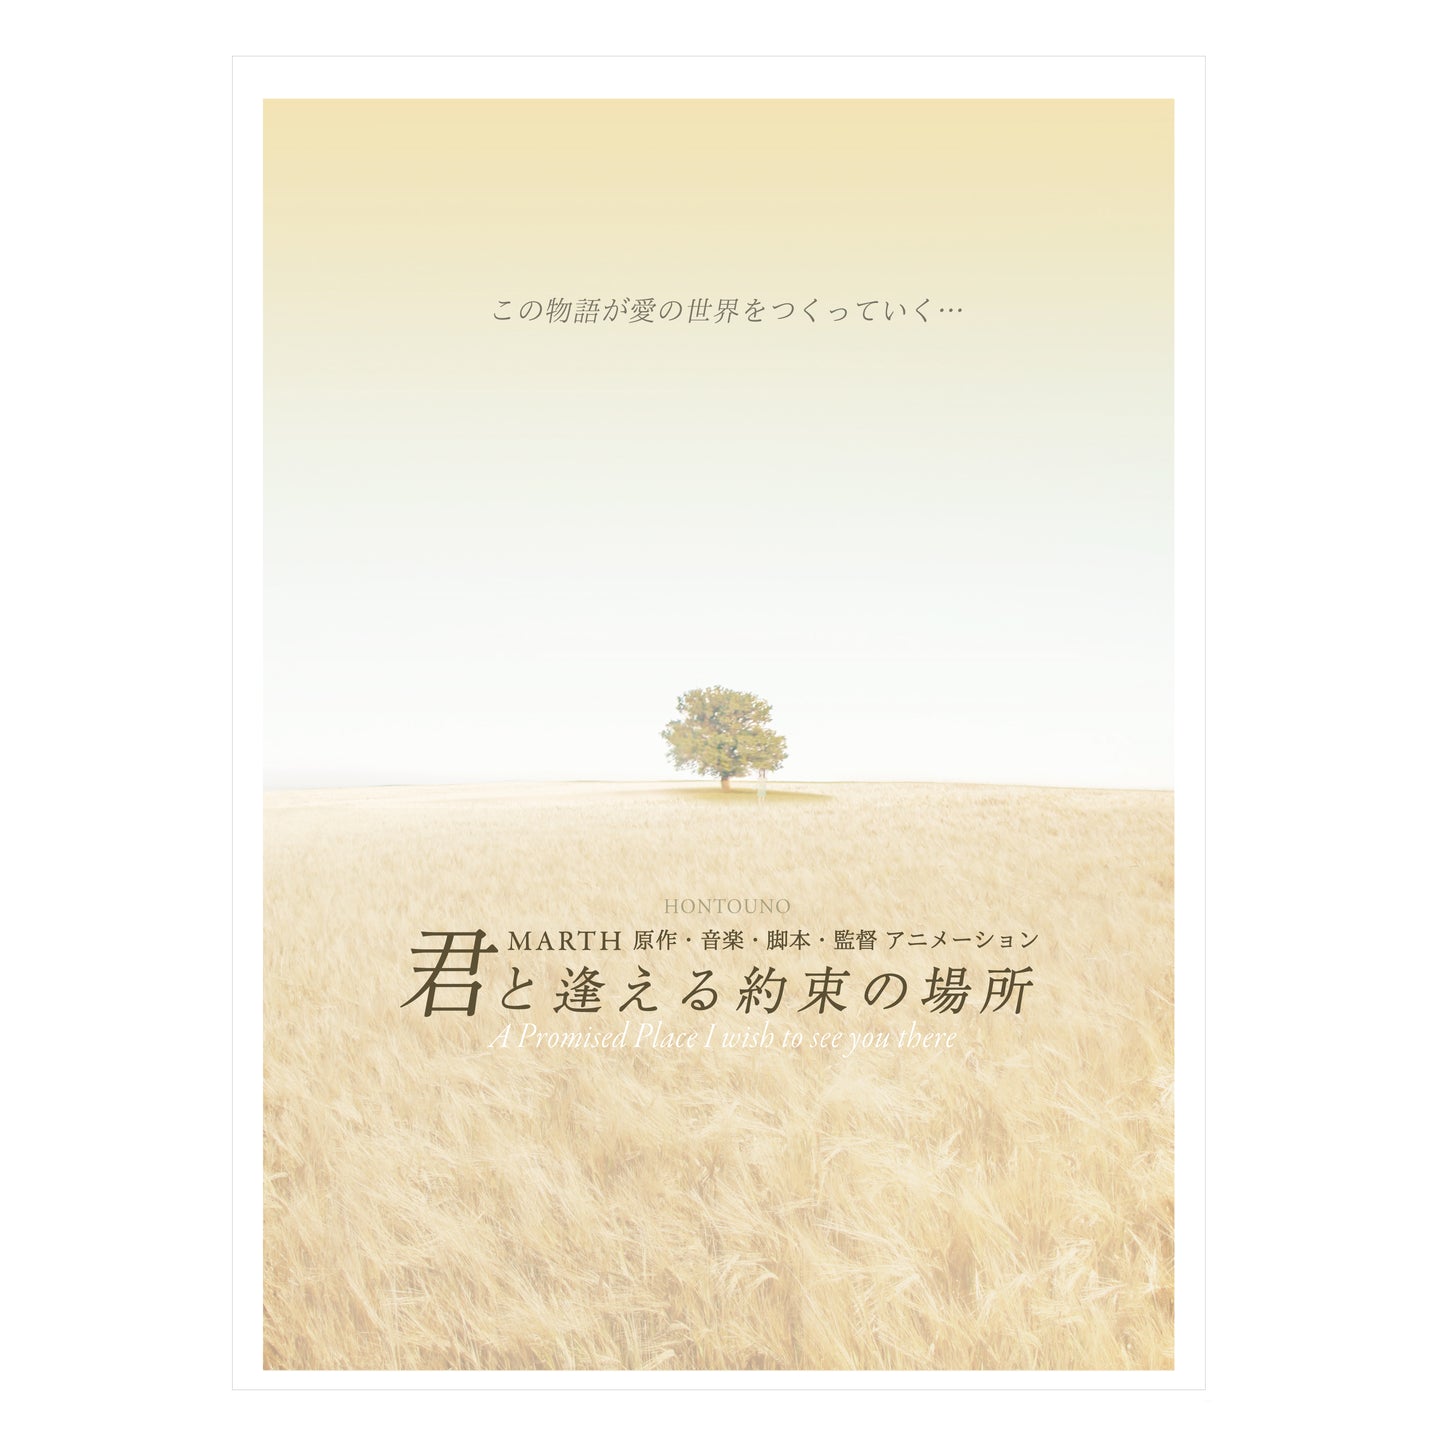 DVD A Promised Place - I wish to see you there (2 DVD)[Japanese]